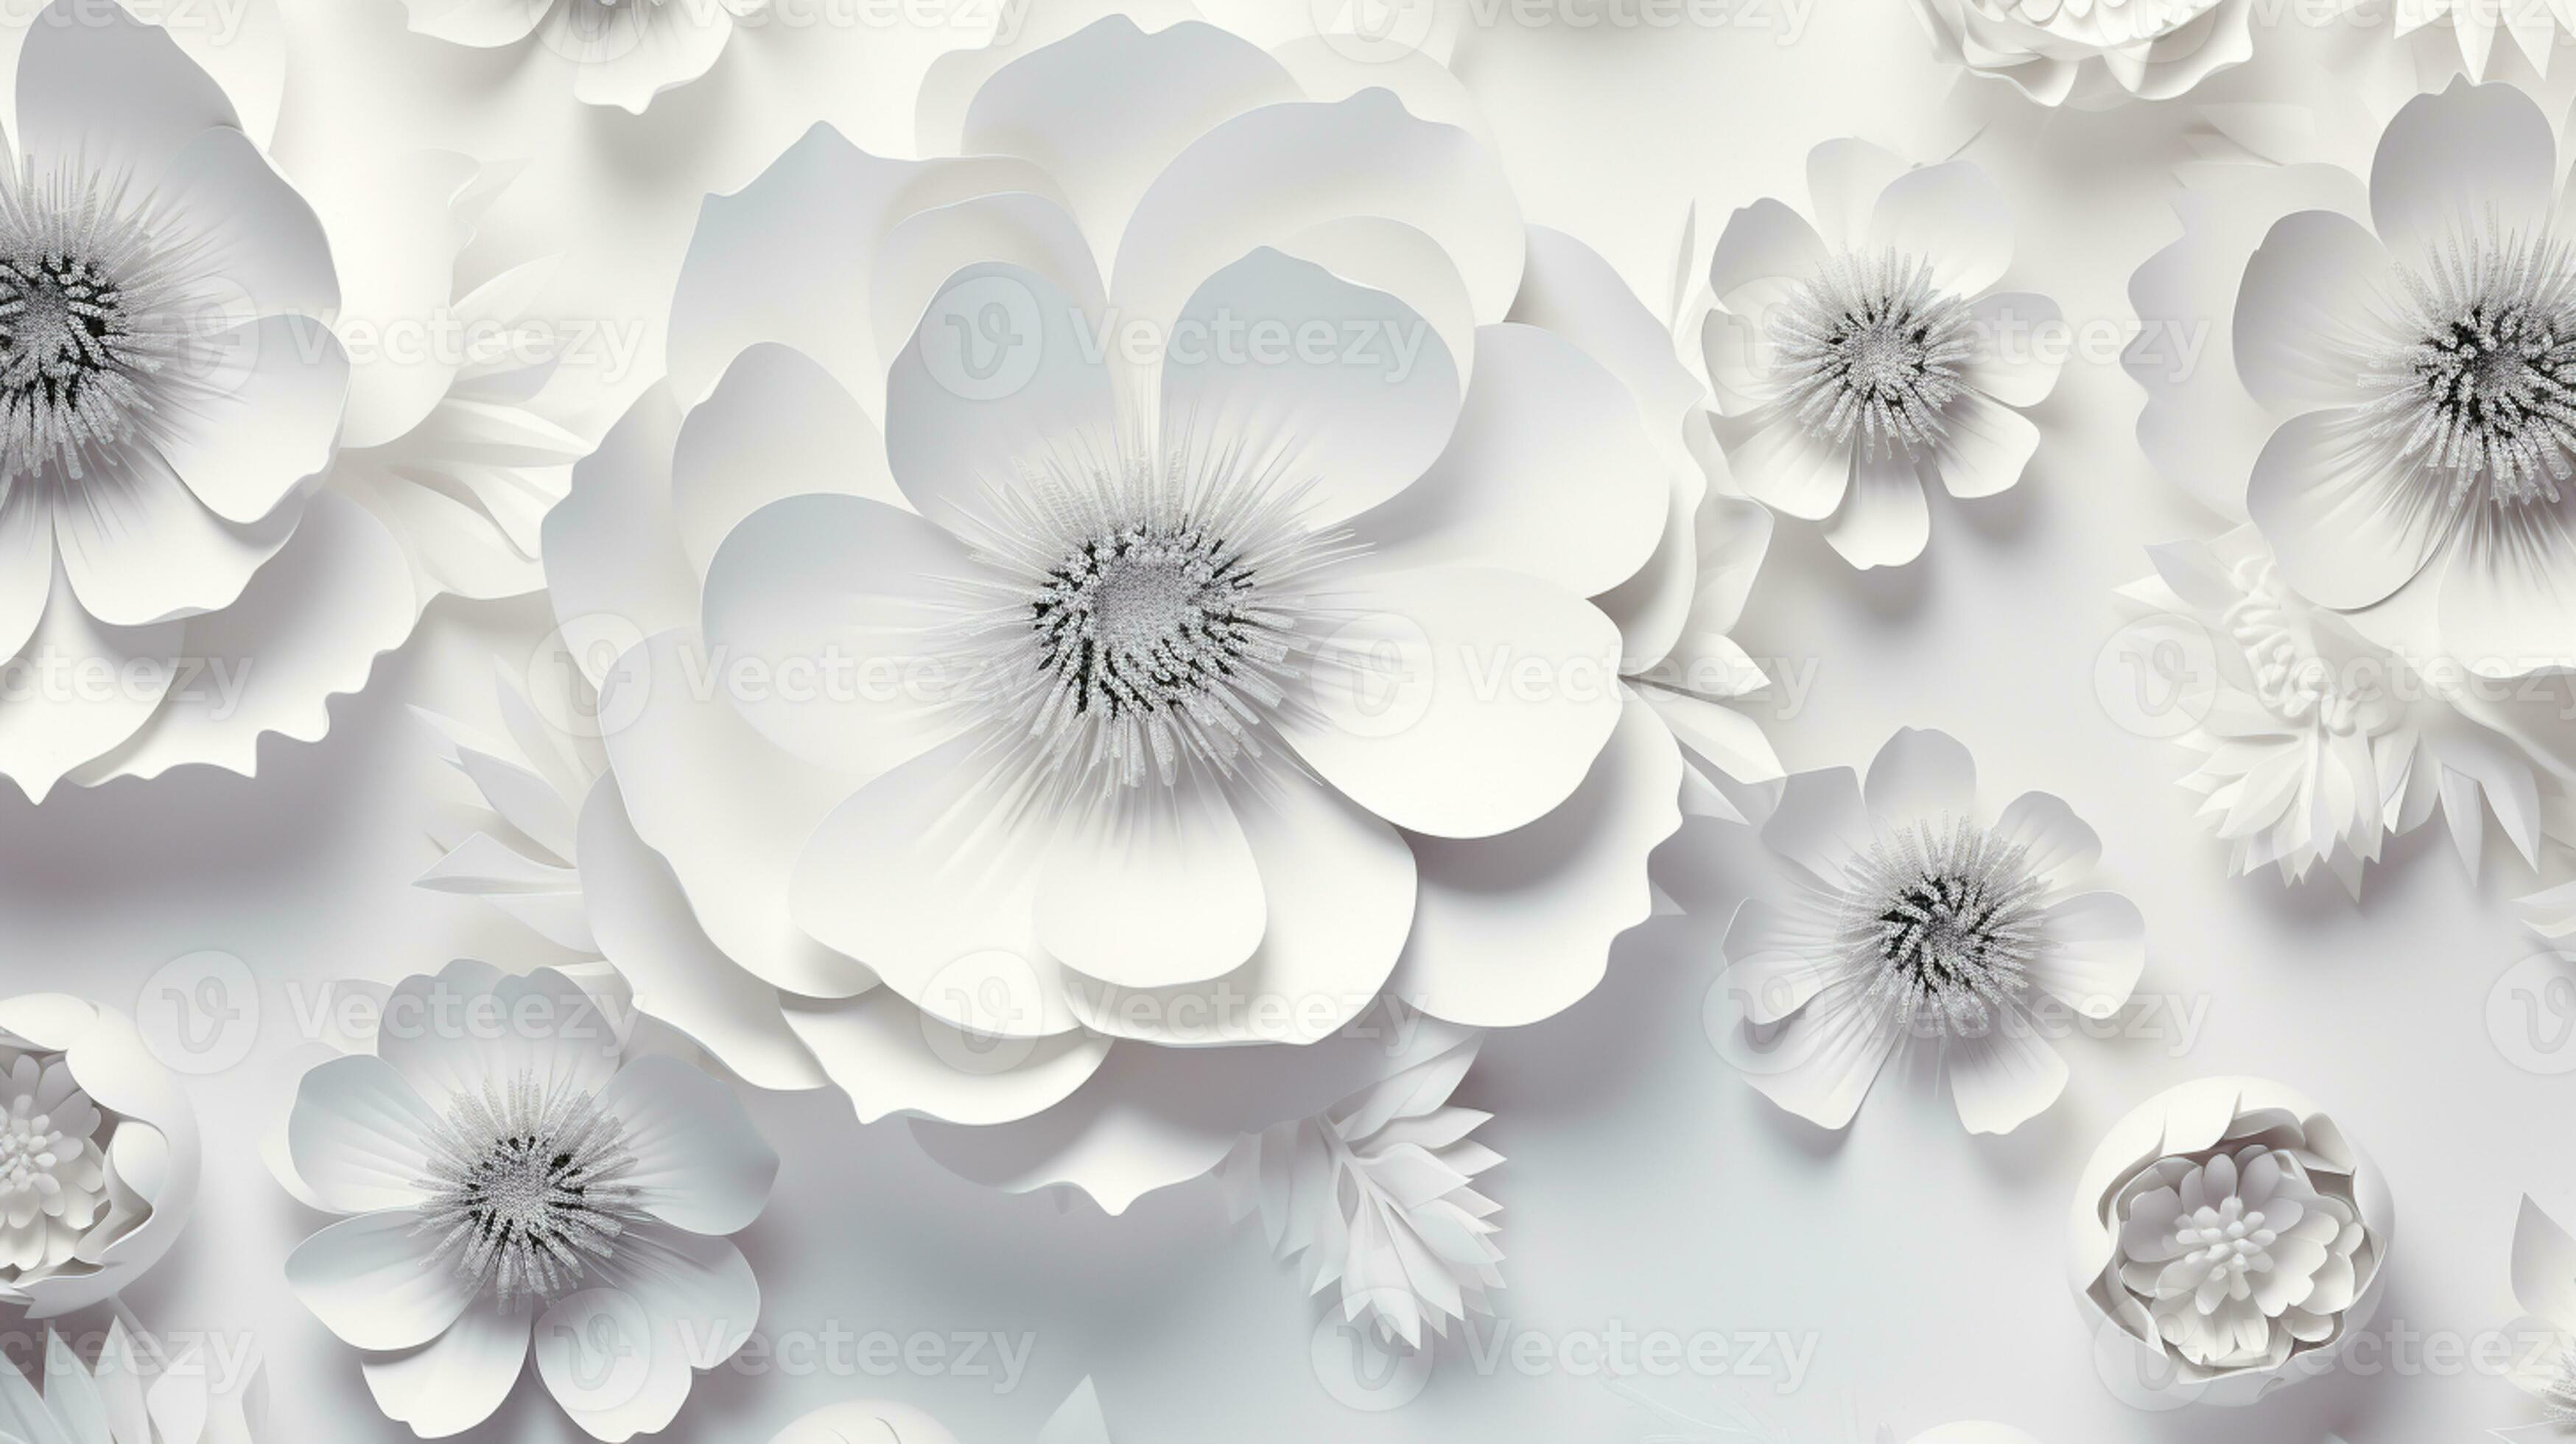 1,283,199 White Paper Flowers Images, Stock Photos, 3D objects, & Vectors